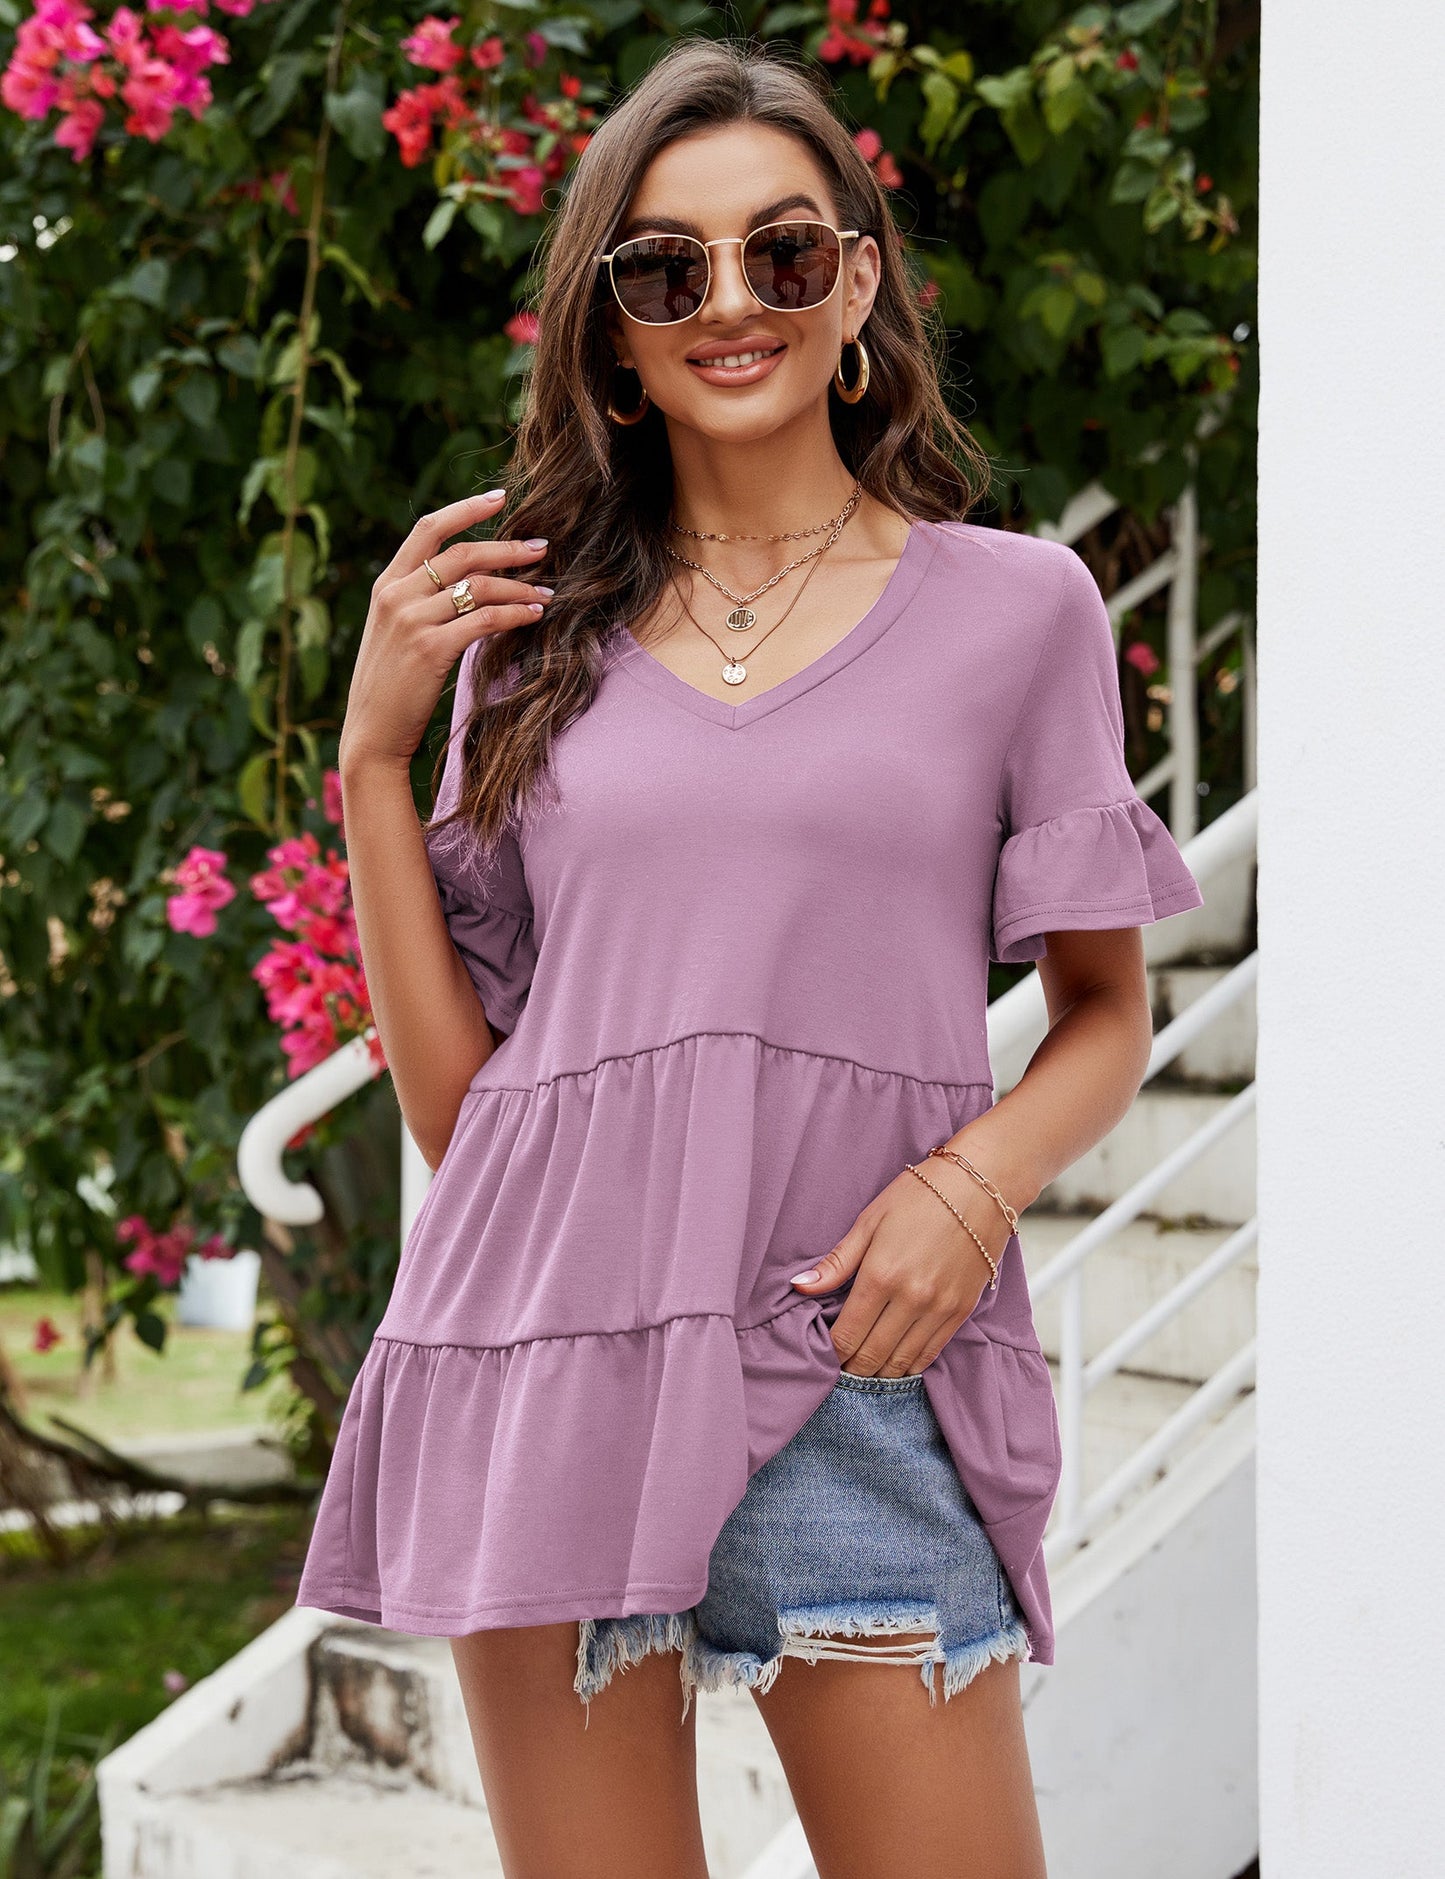 YESFASHION Peplum Tops for Women Summer Casual V Neck T Shirts Pink